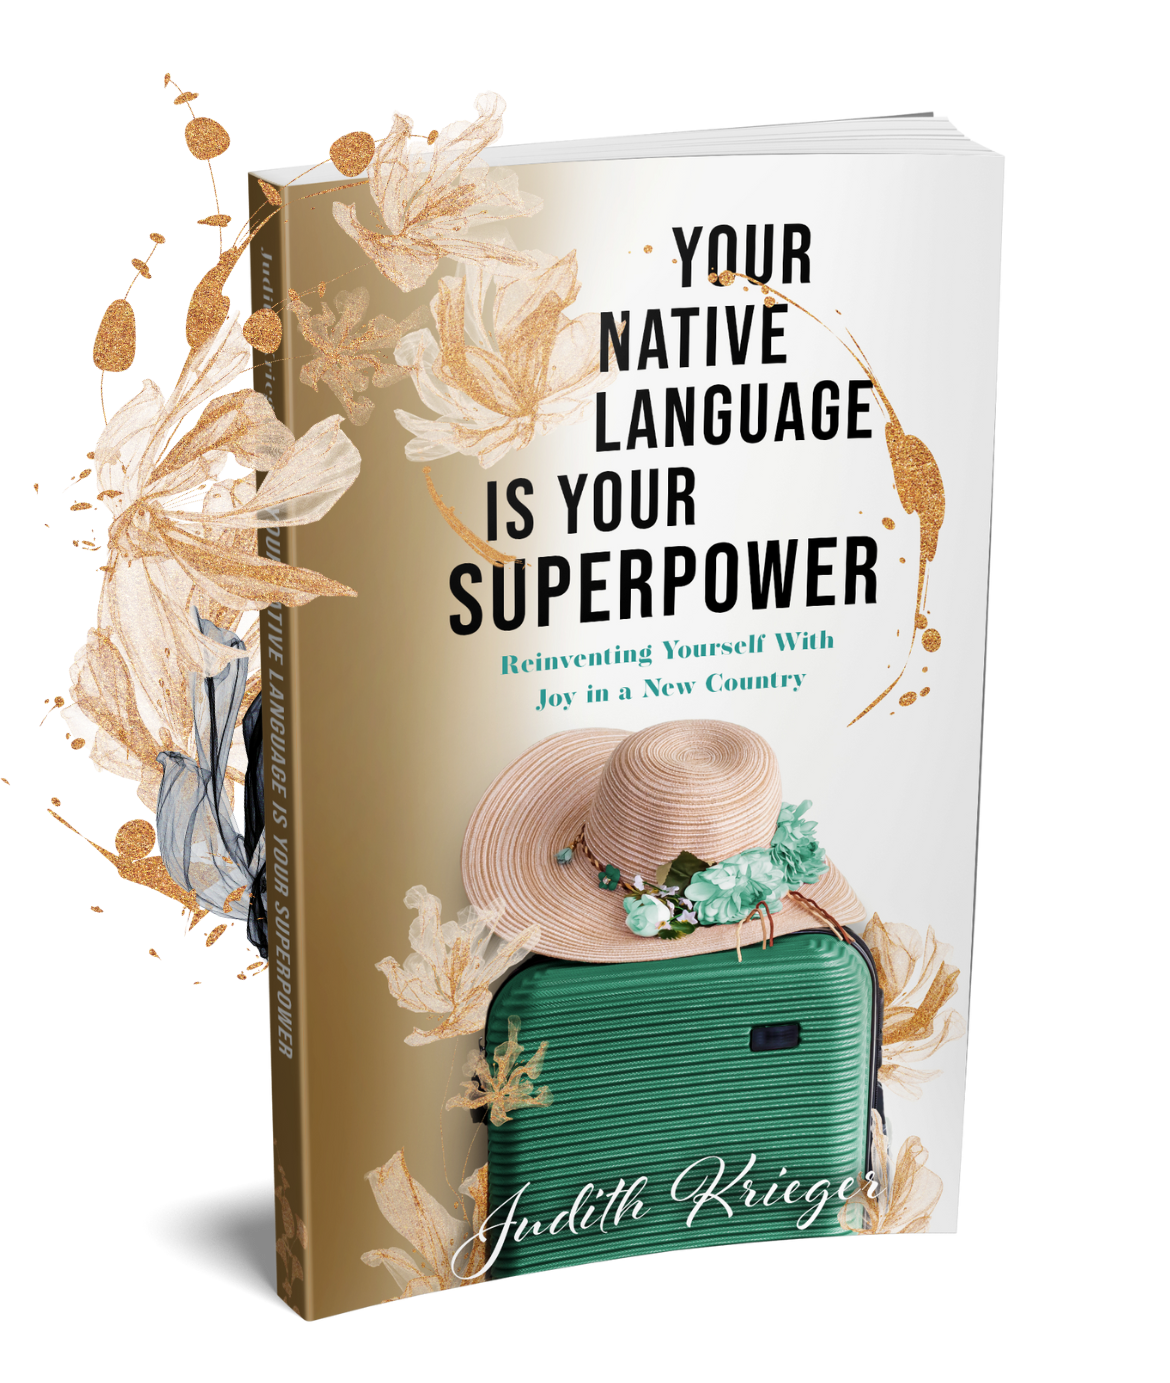 your native language is your superpower book for immigrants image